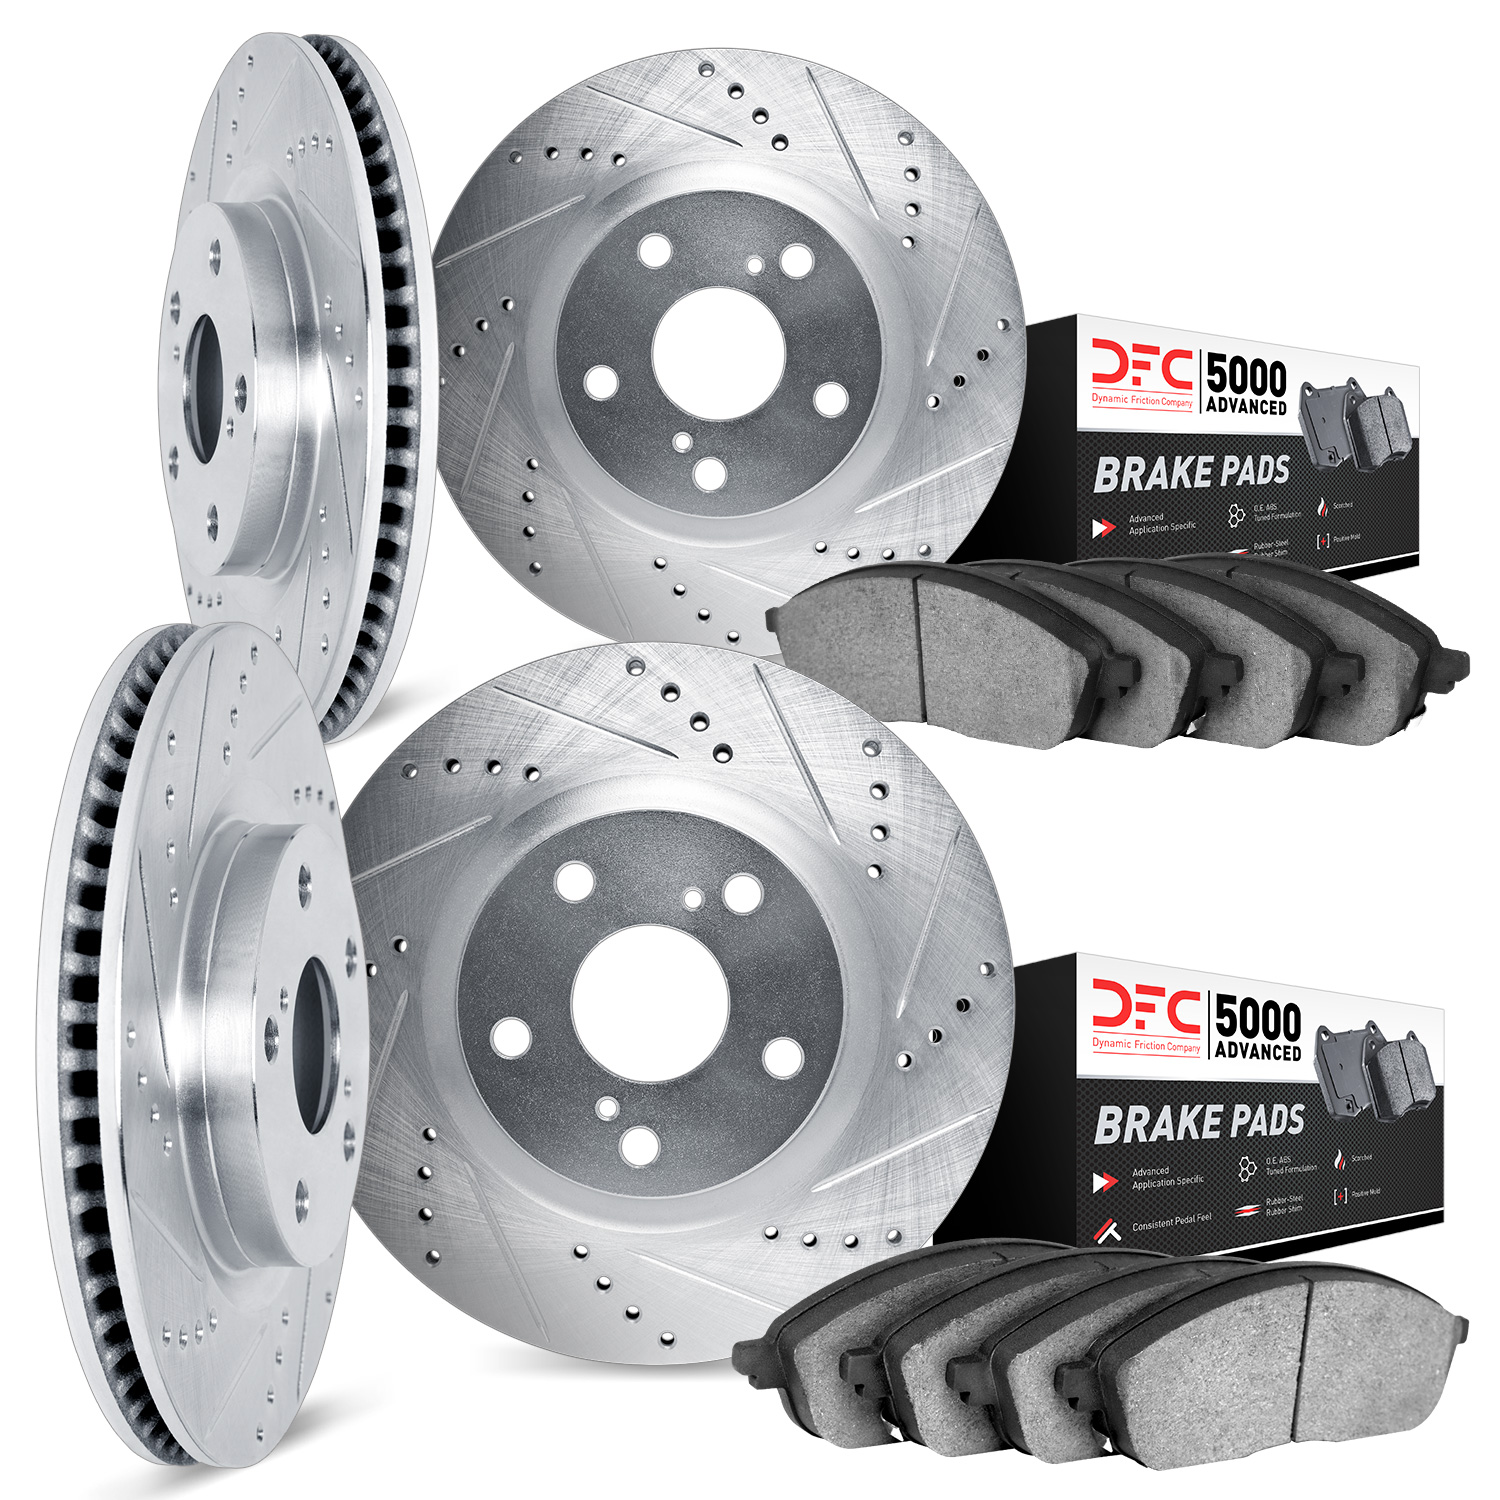 7504-67104 Drilled/Slotted Brake Rotors w/5000 Advanced Brake Pads Kit [Silver], 2003-2011 Infiniti/Nissan, Position: Front and